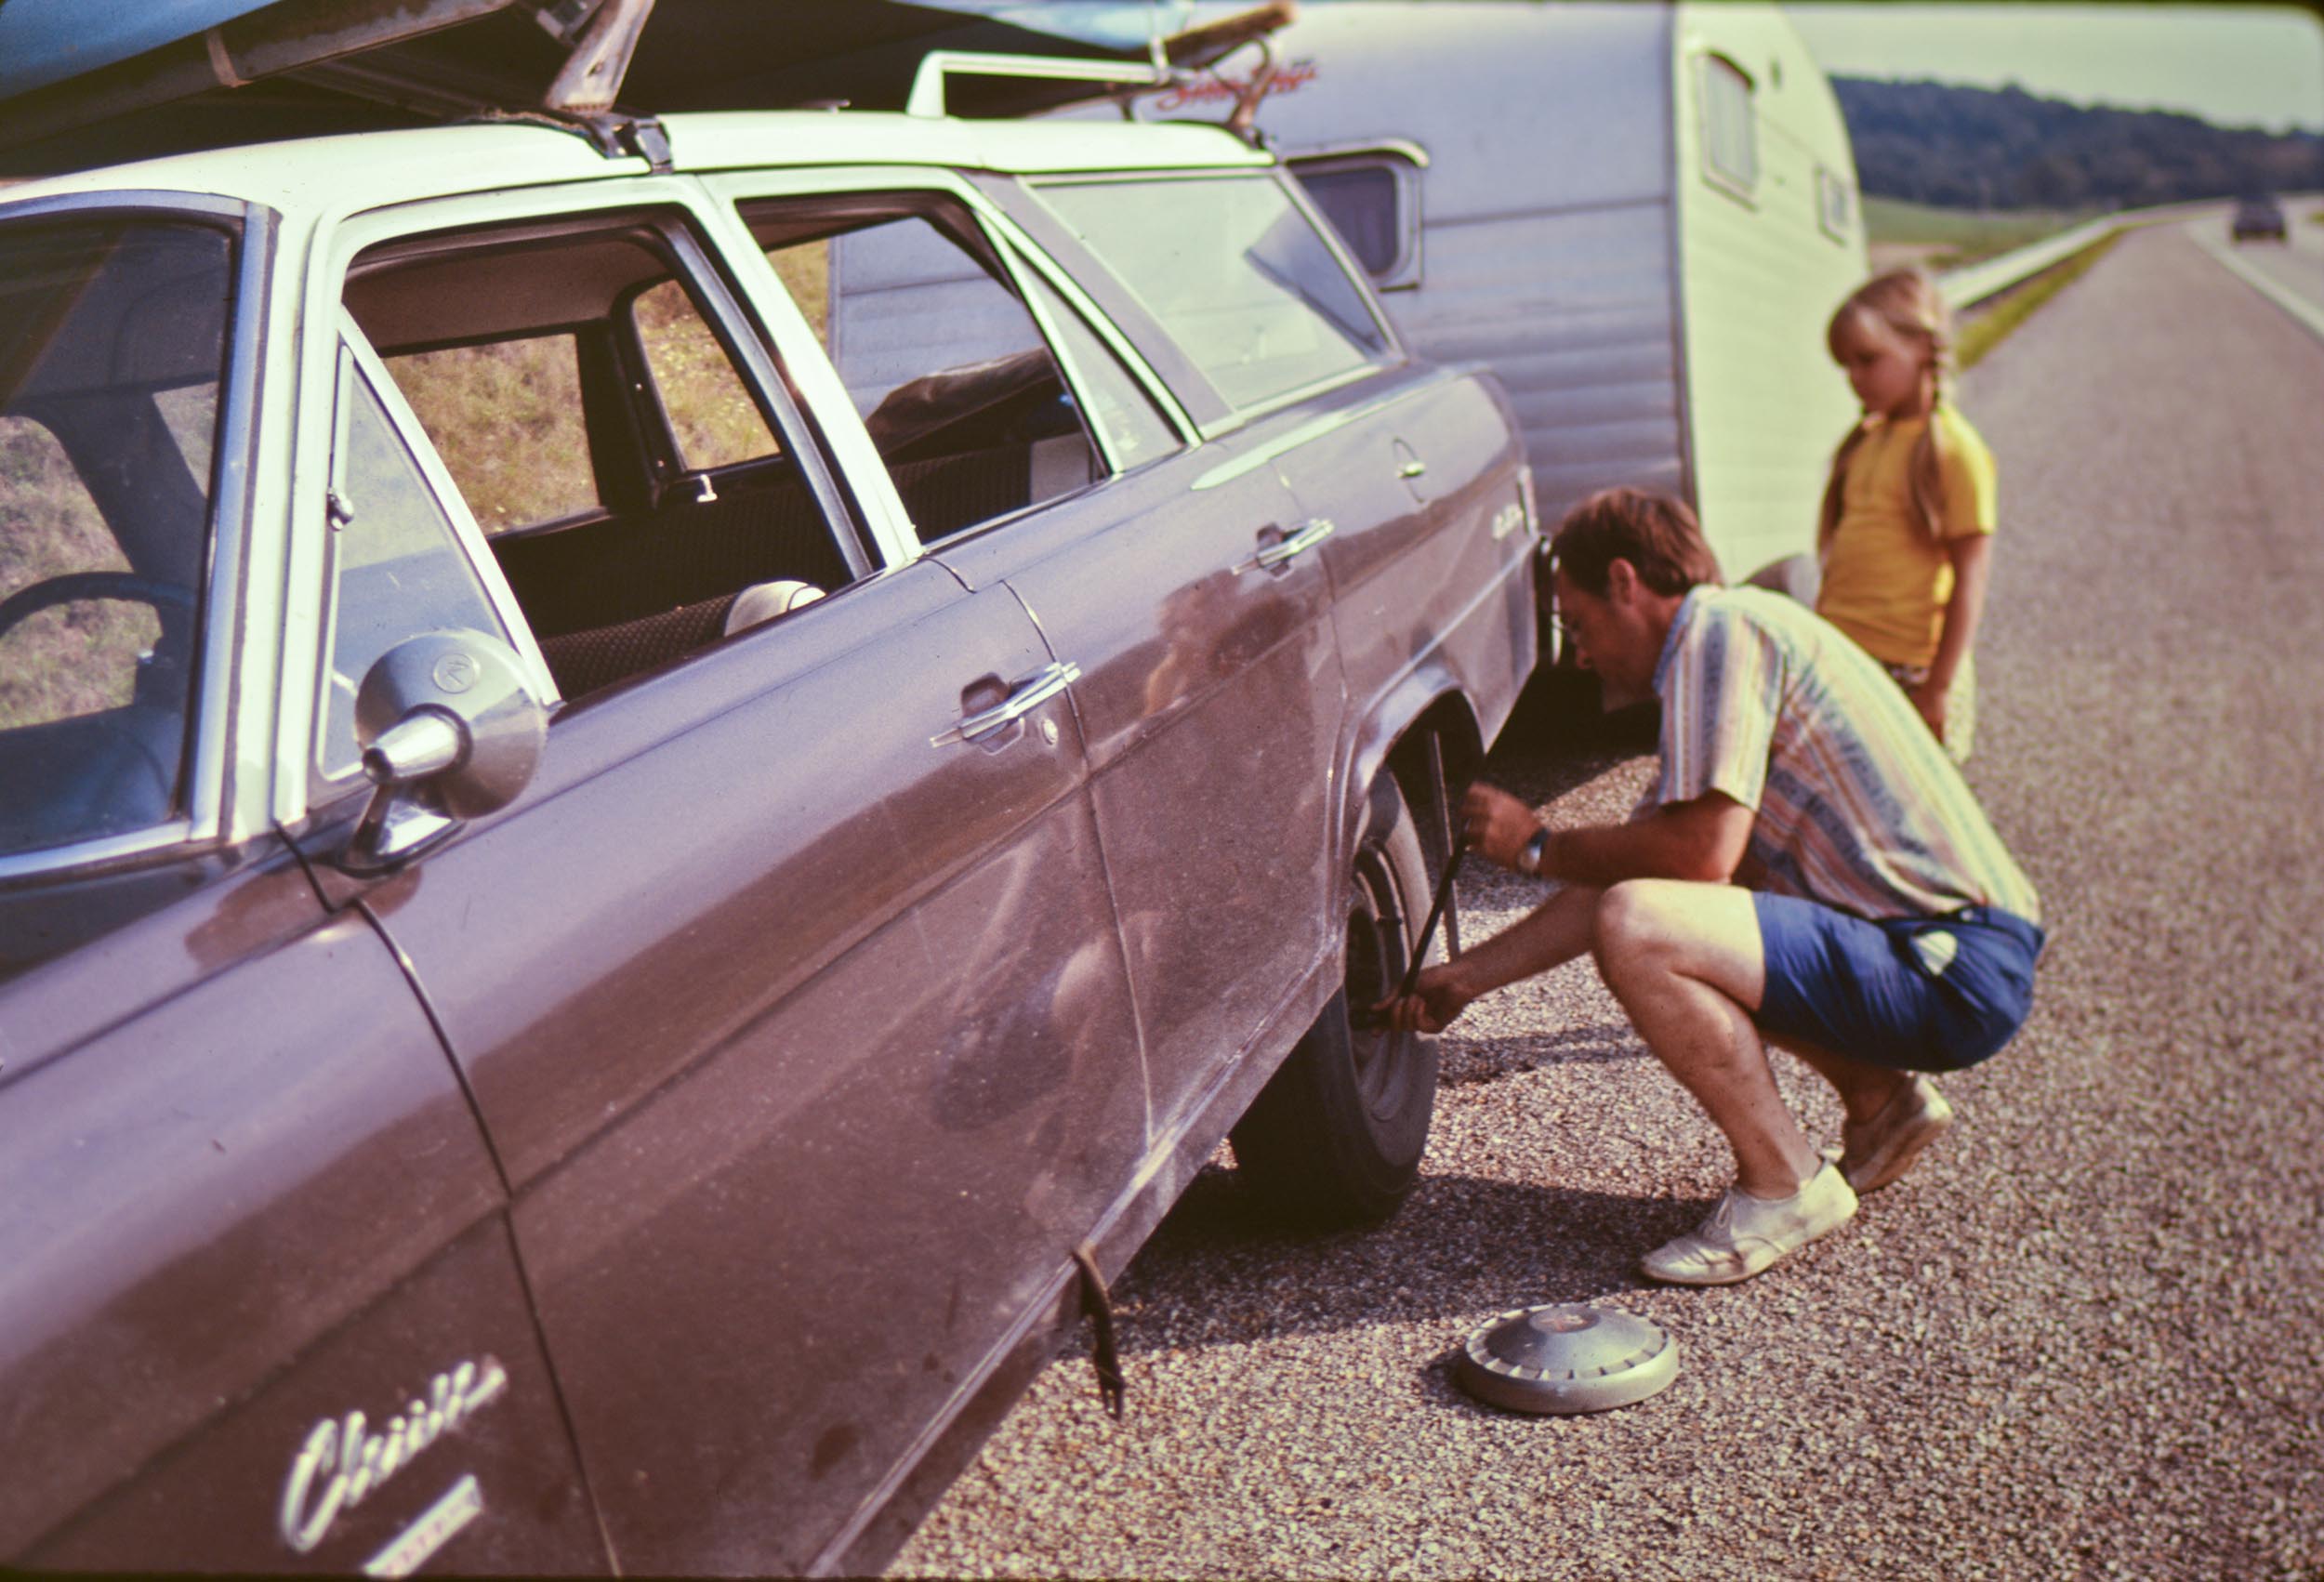 The family was traveling on the interstate to Myrtle Beach in 1973 and the tire came apart on the good old '65 Rambler Classic Wagon. Luckily my dad had the spare ready to go. View full size.
